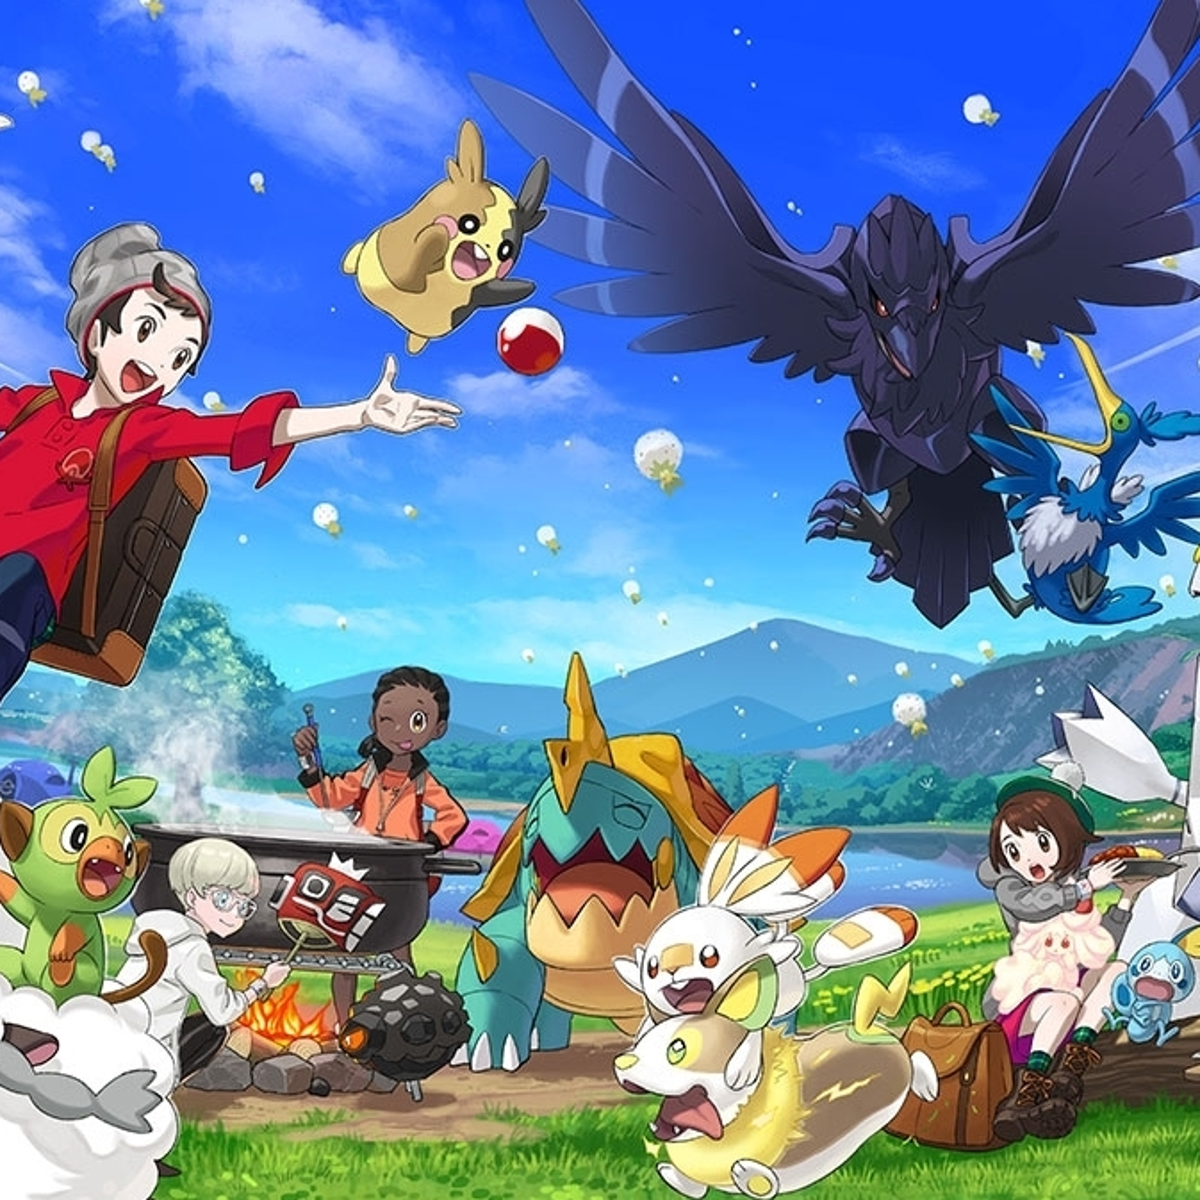 Pokémon Sword and Shield walkthrough and guide to your journey